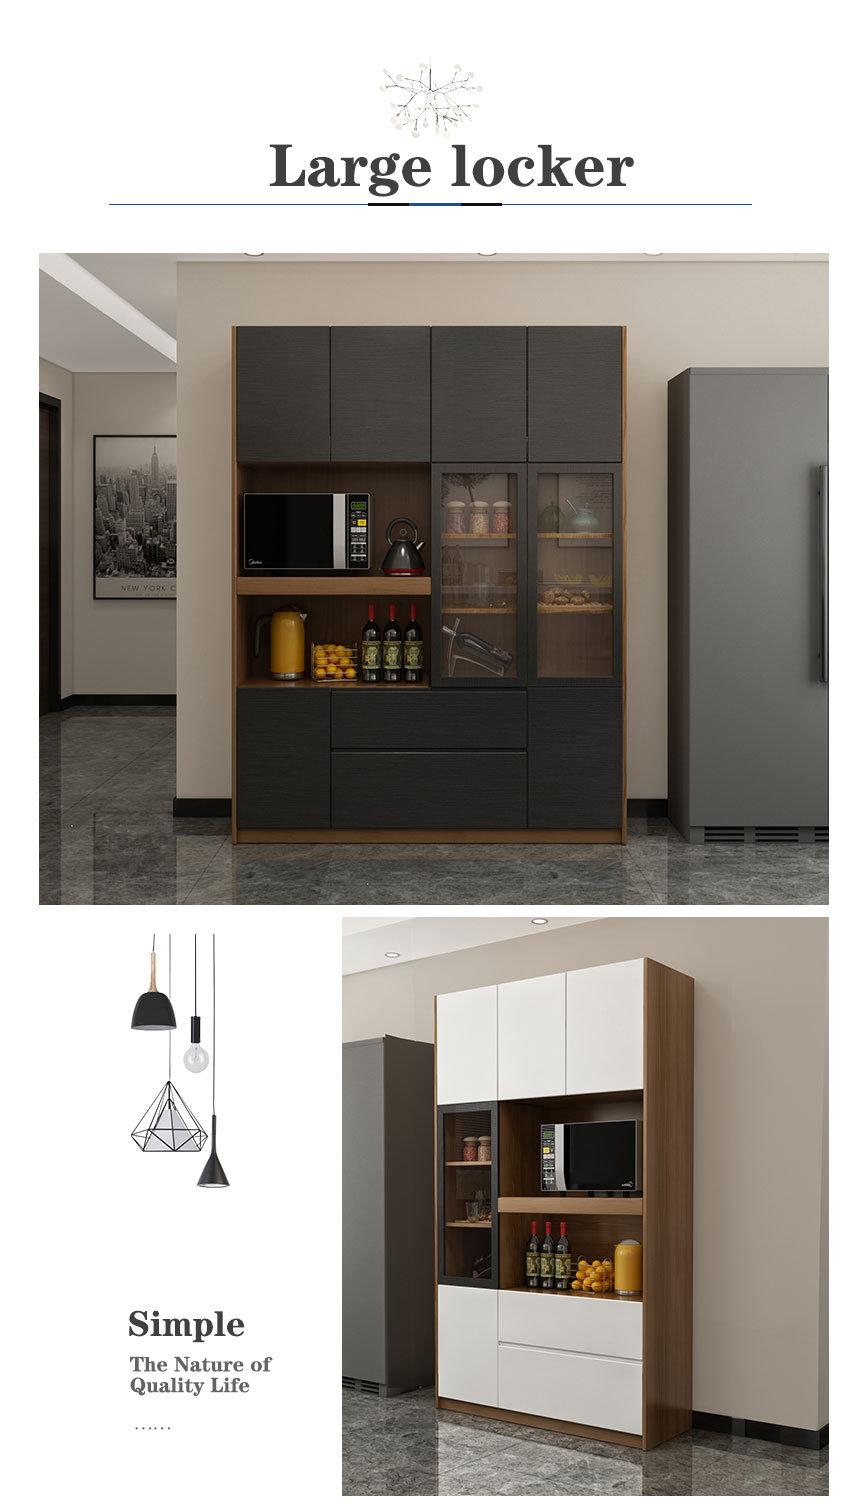 Modern Tall Kitchen Cabinets Home Living Room Furniture Kitchen Cabinets